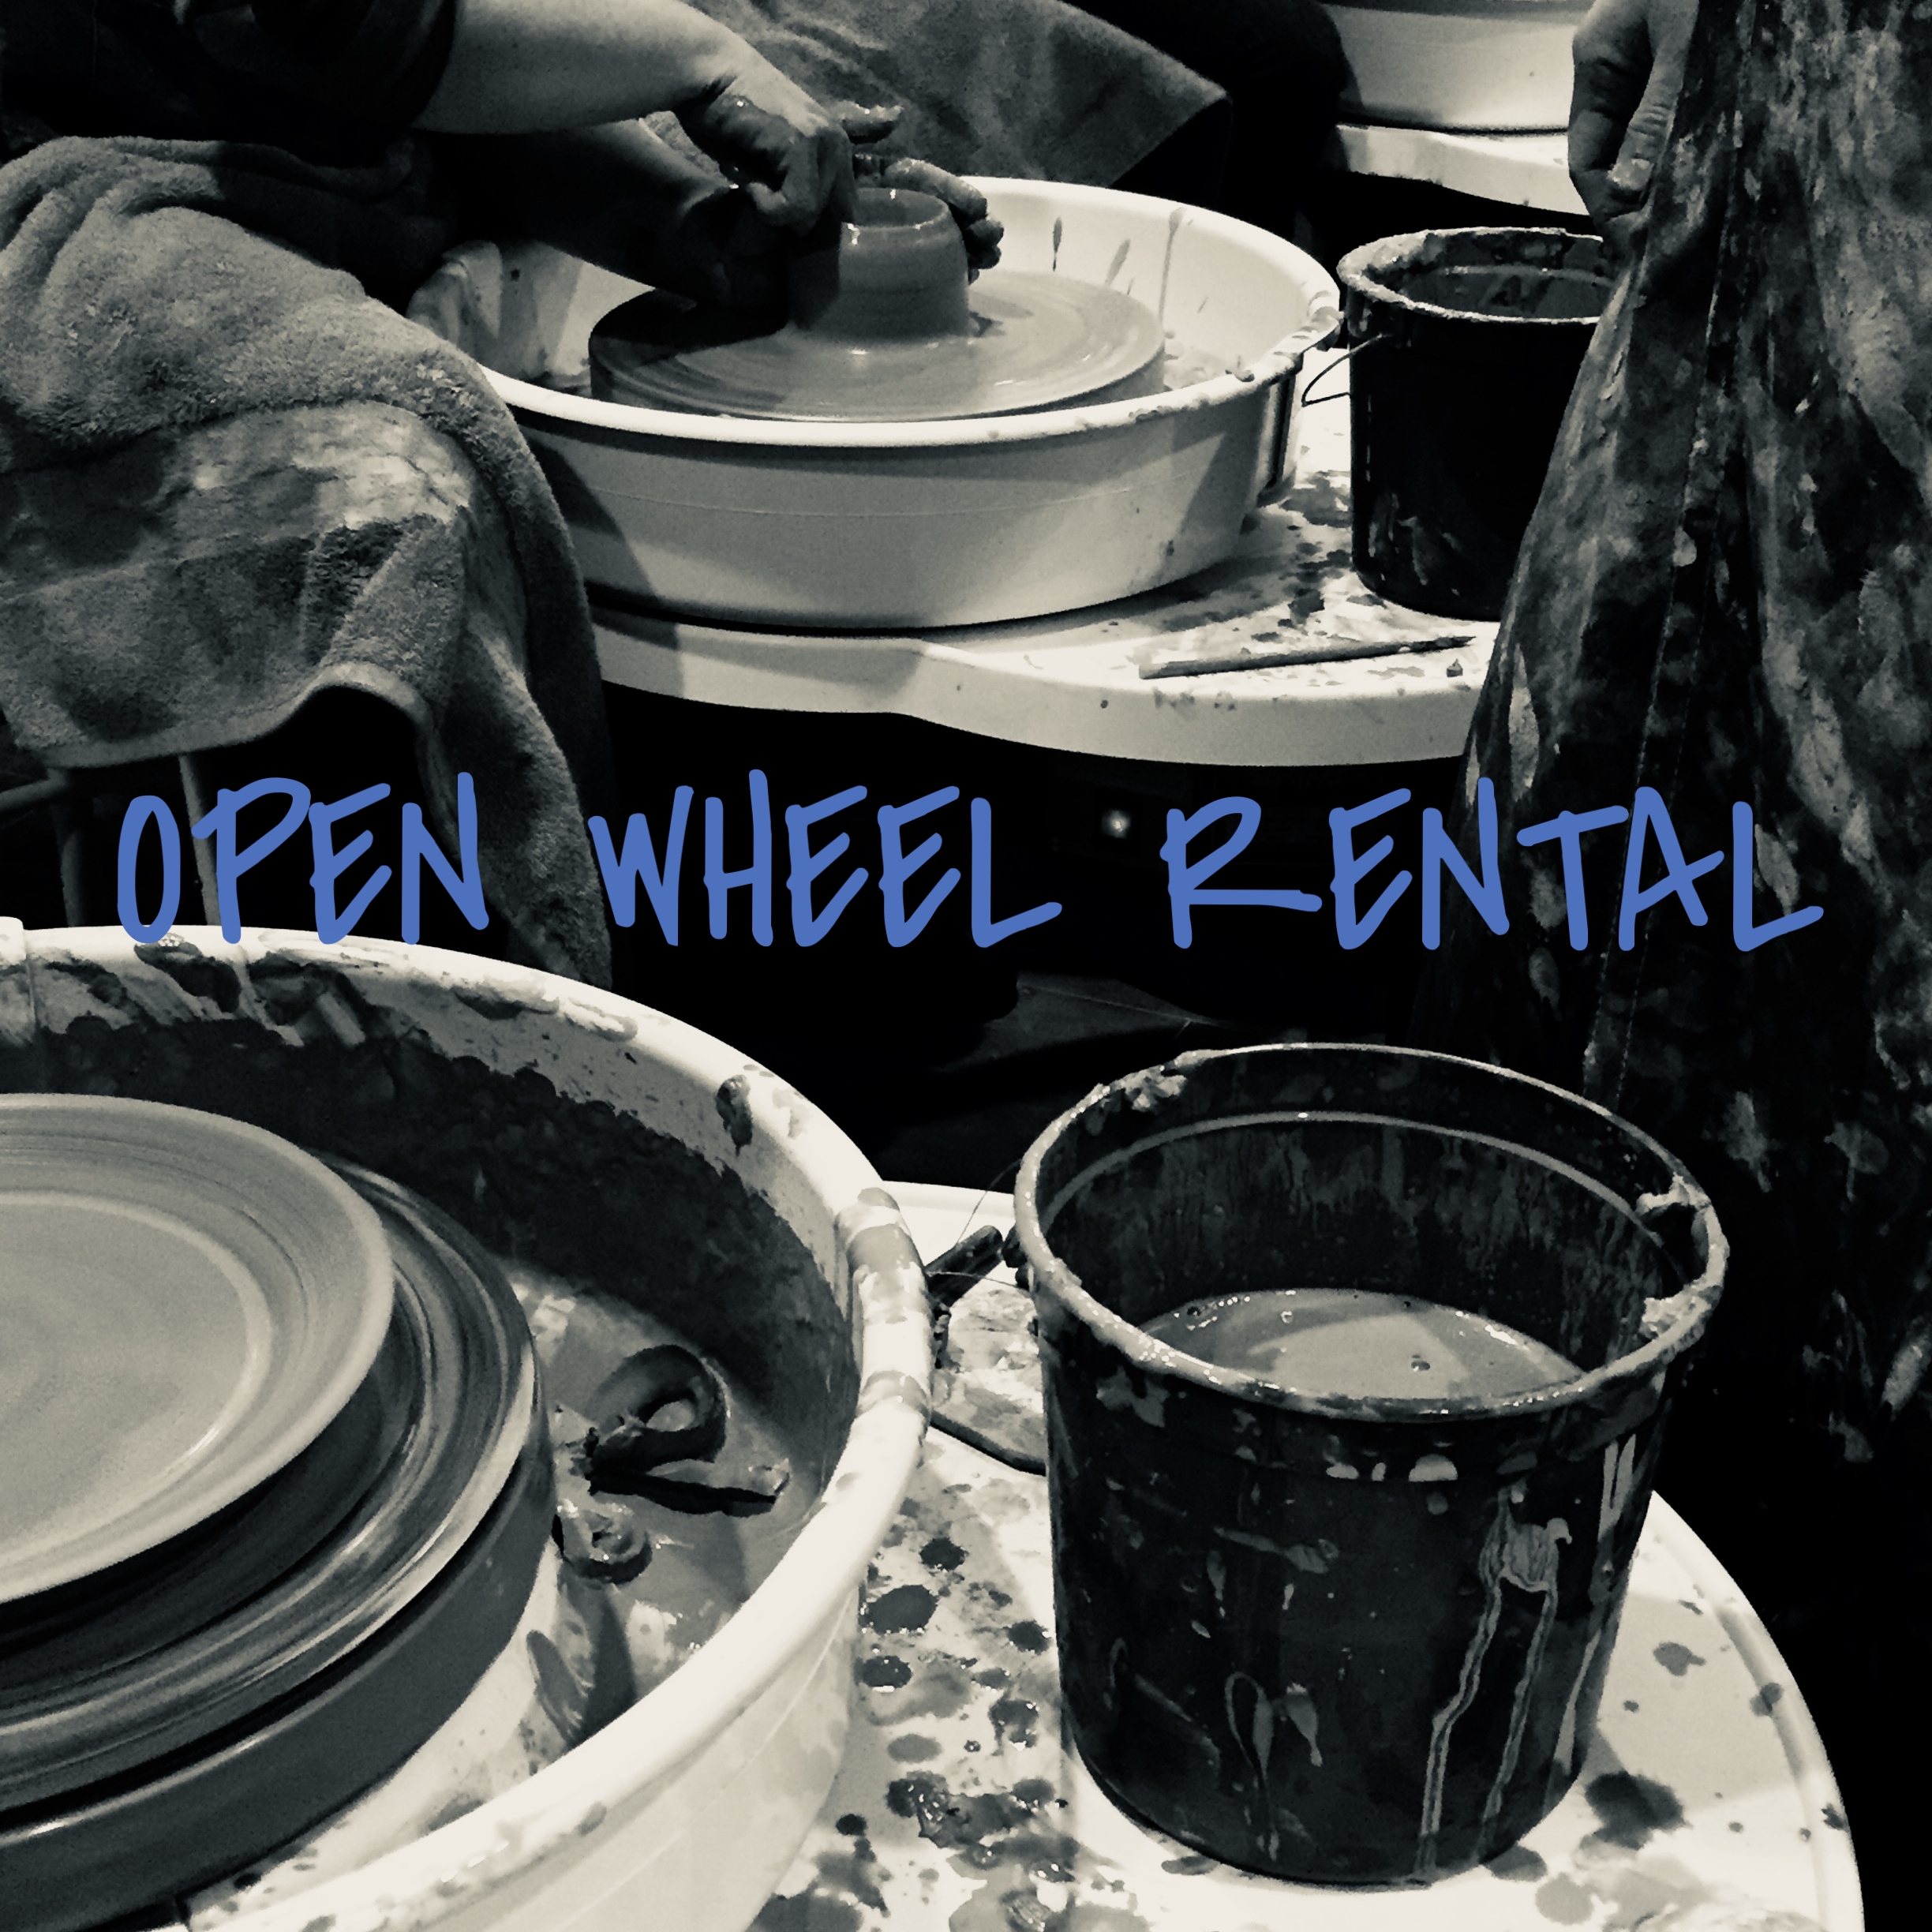 Package of 4 Pottery Wheel Sessions